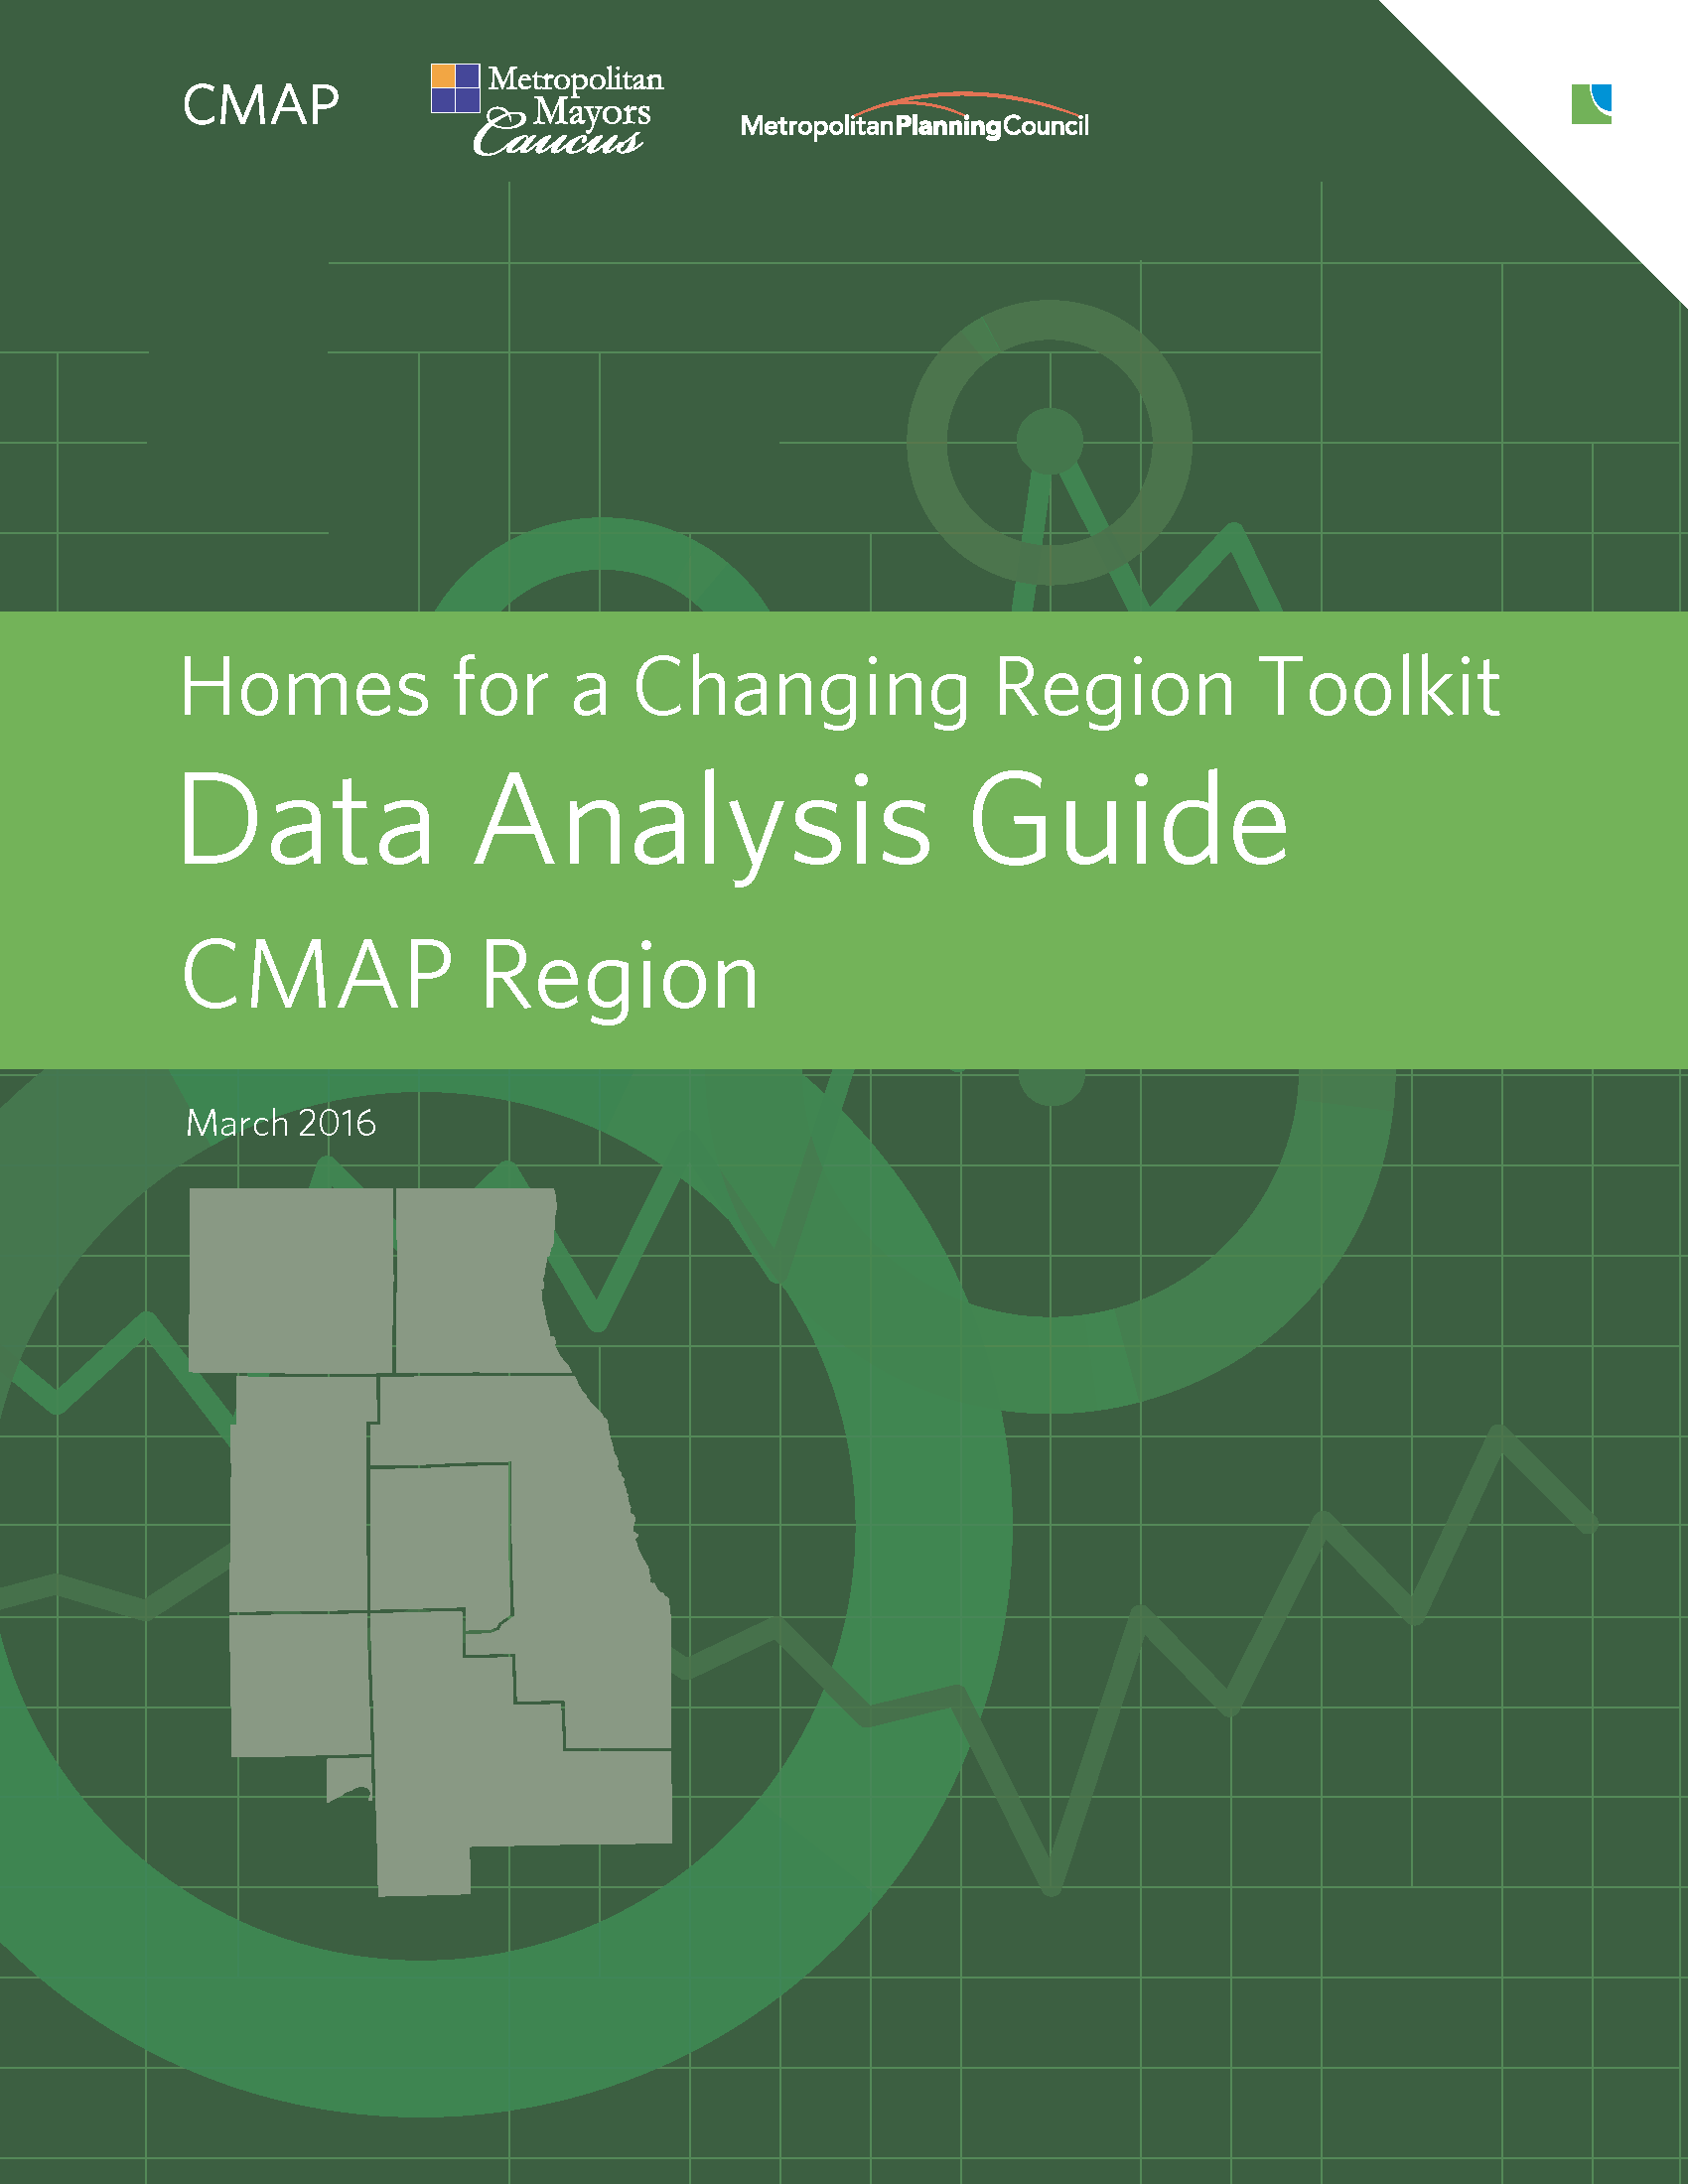 FY16-0060 2016 HOMES TOOLKIT DATA ANALYSIS GUIDE COVER - CMAP REGION_Page_1.png